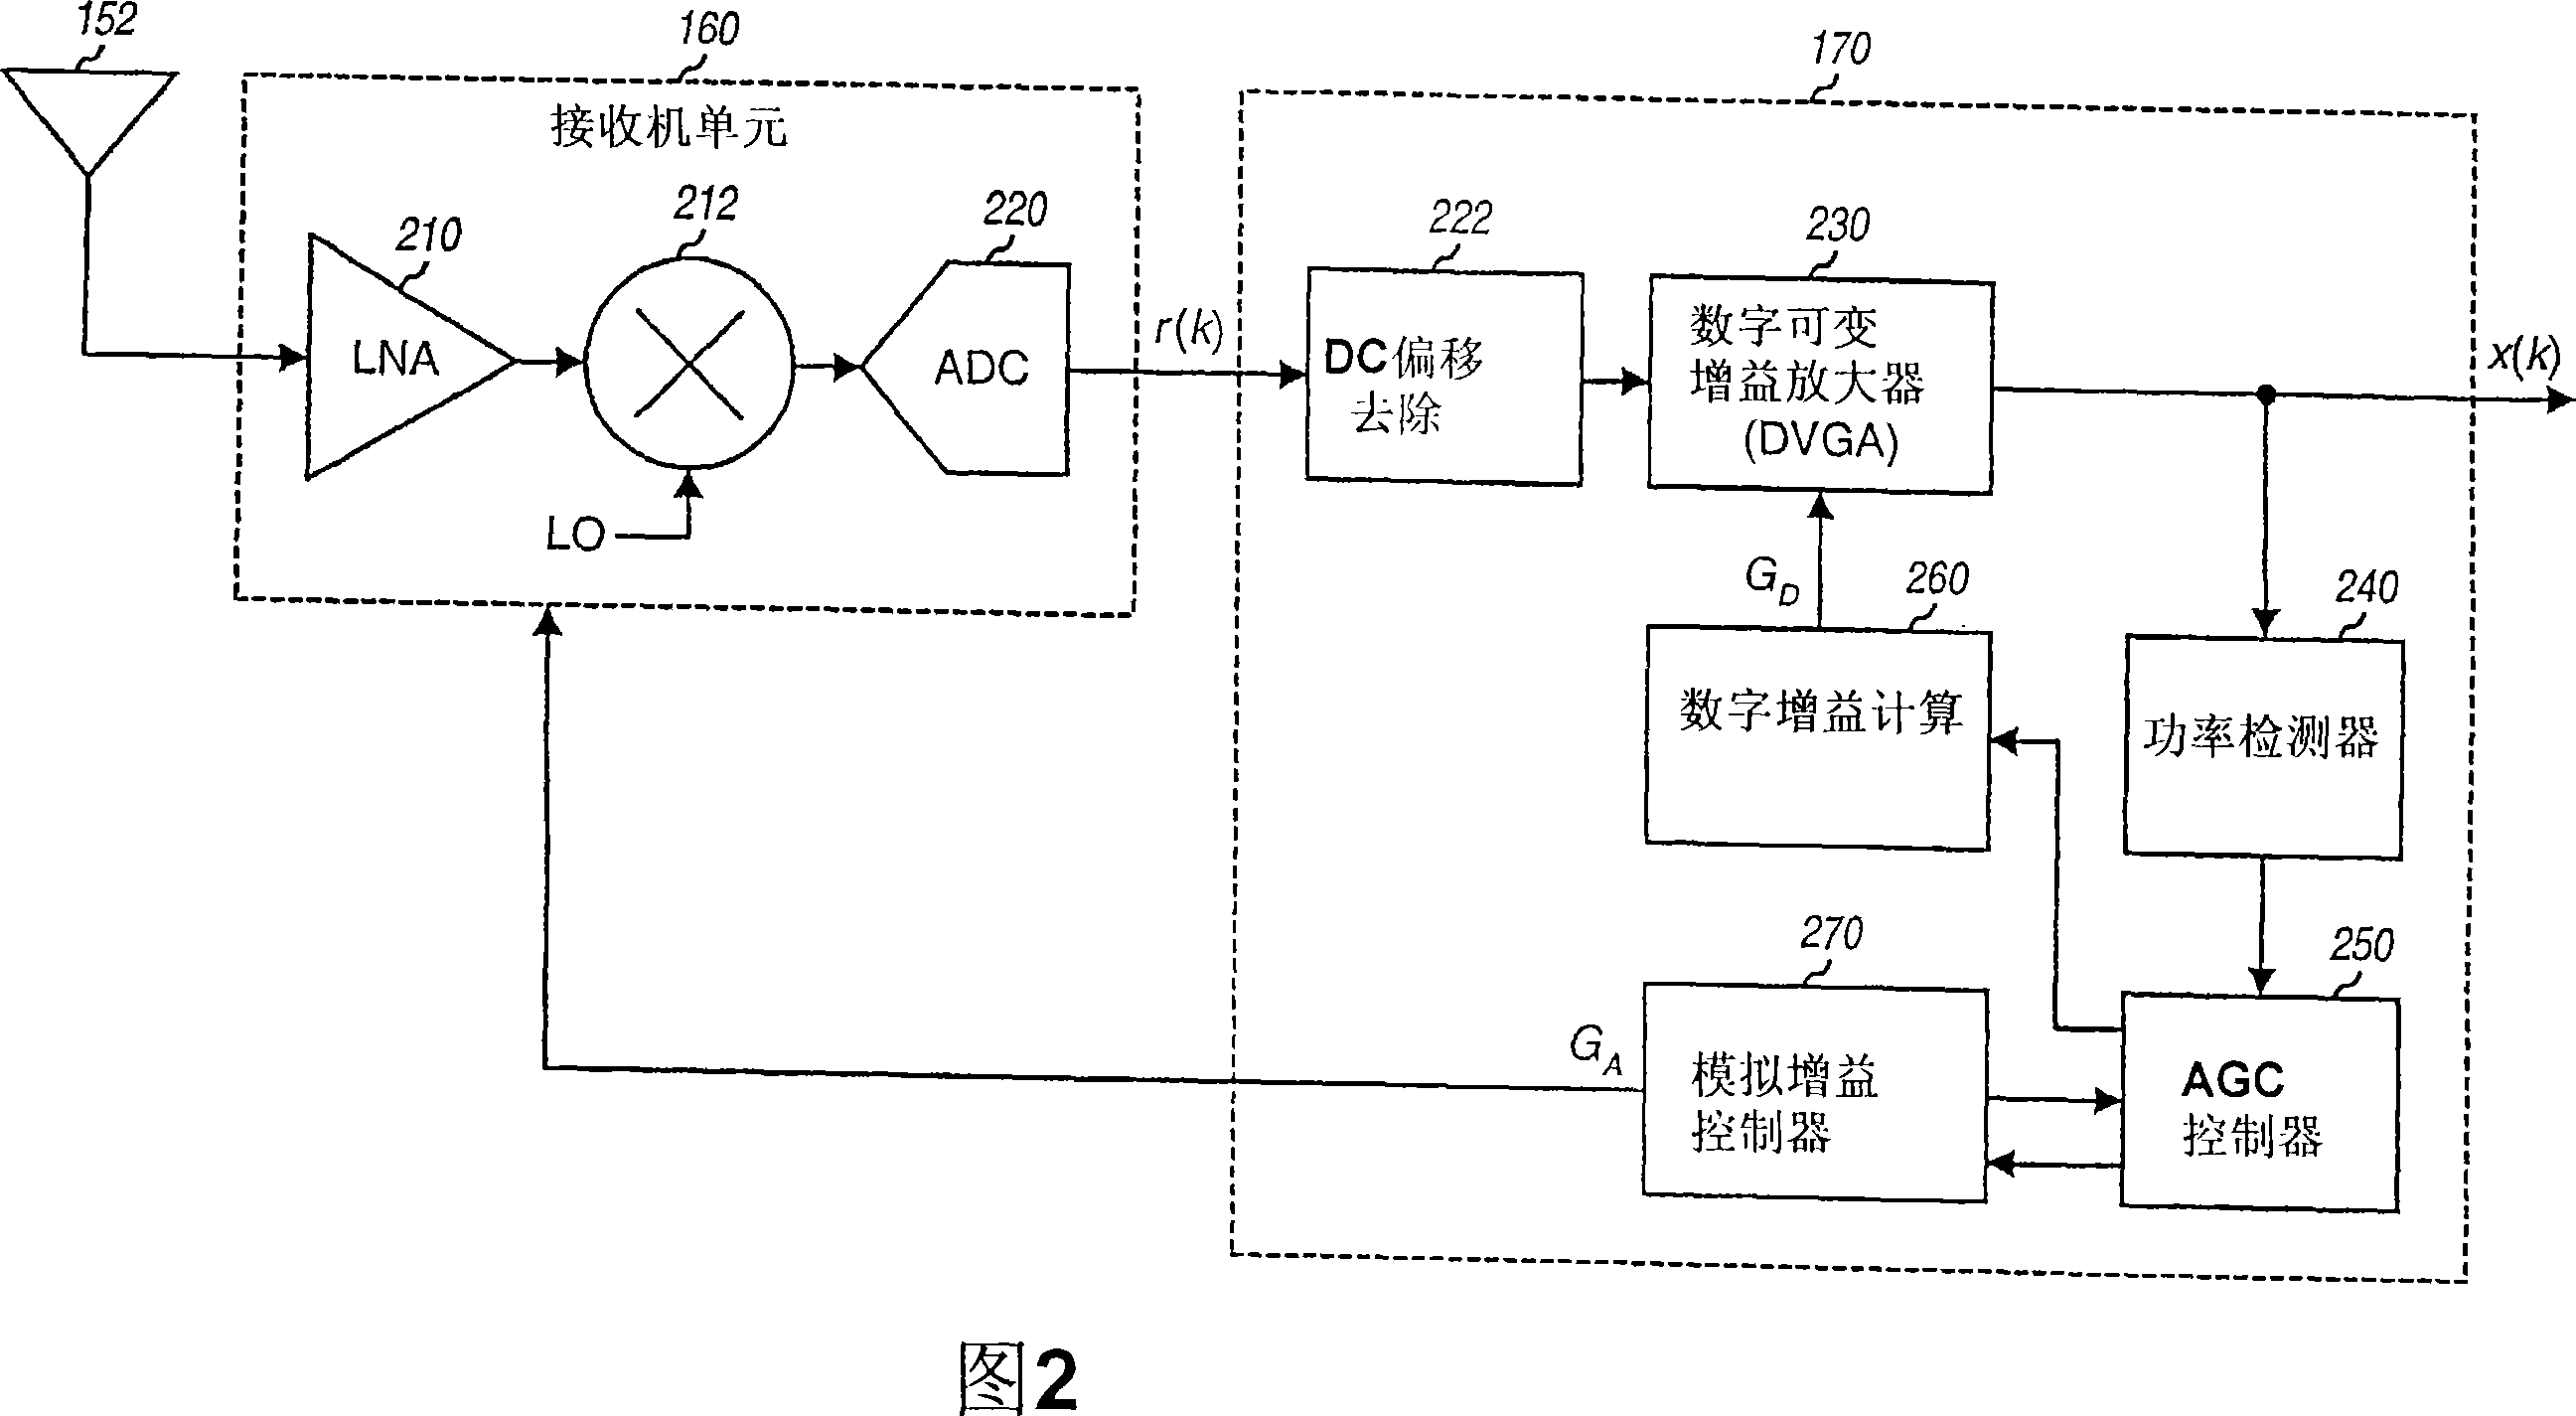 Automatic gain control for a wireless receiver